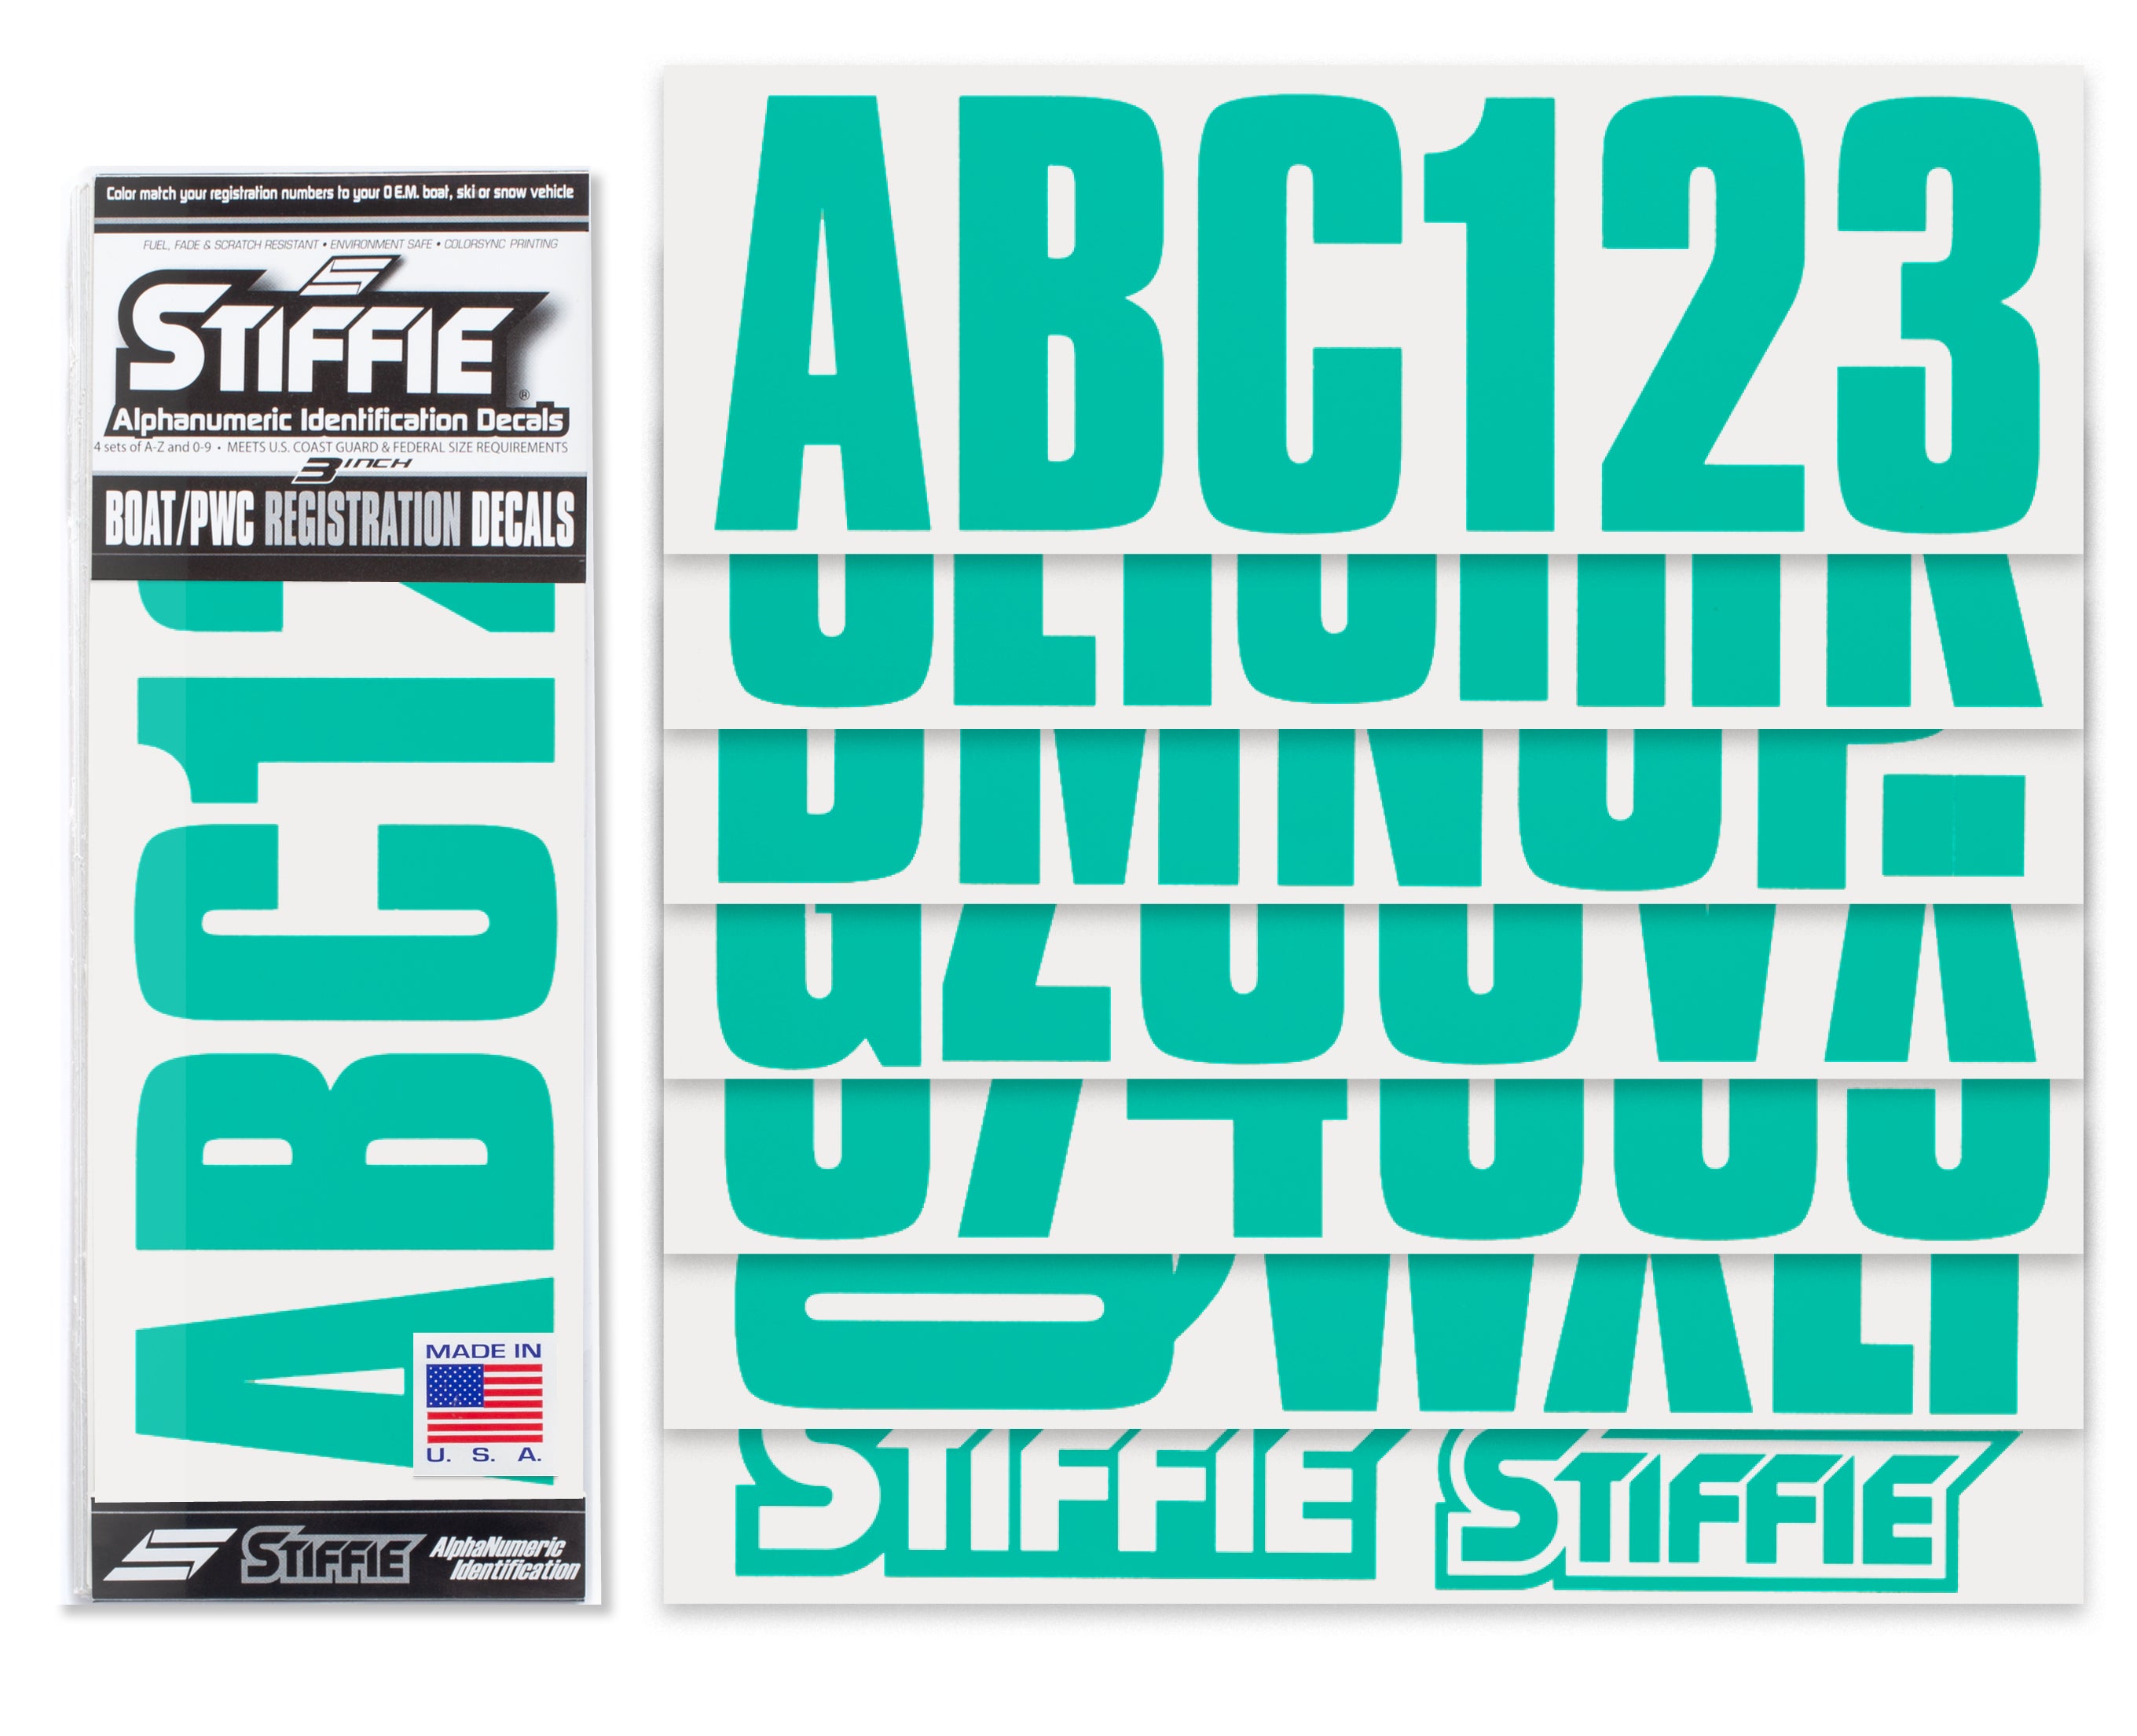 STIFFIE Uniline Sea Teal 3" ID Kit Alpha-Numeric Registration Identification Numbers Stickers Decals for Boats & Personal Watercraft